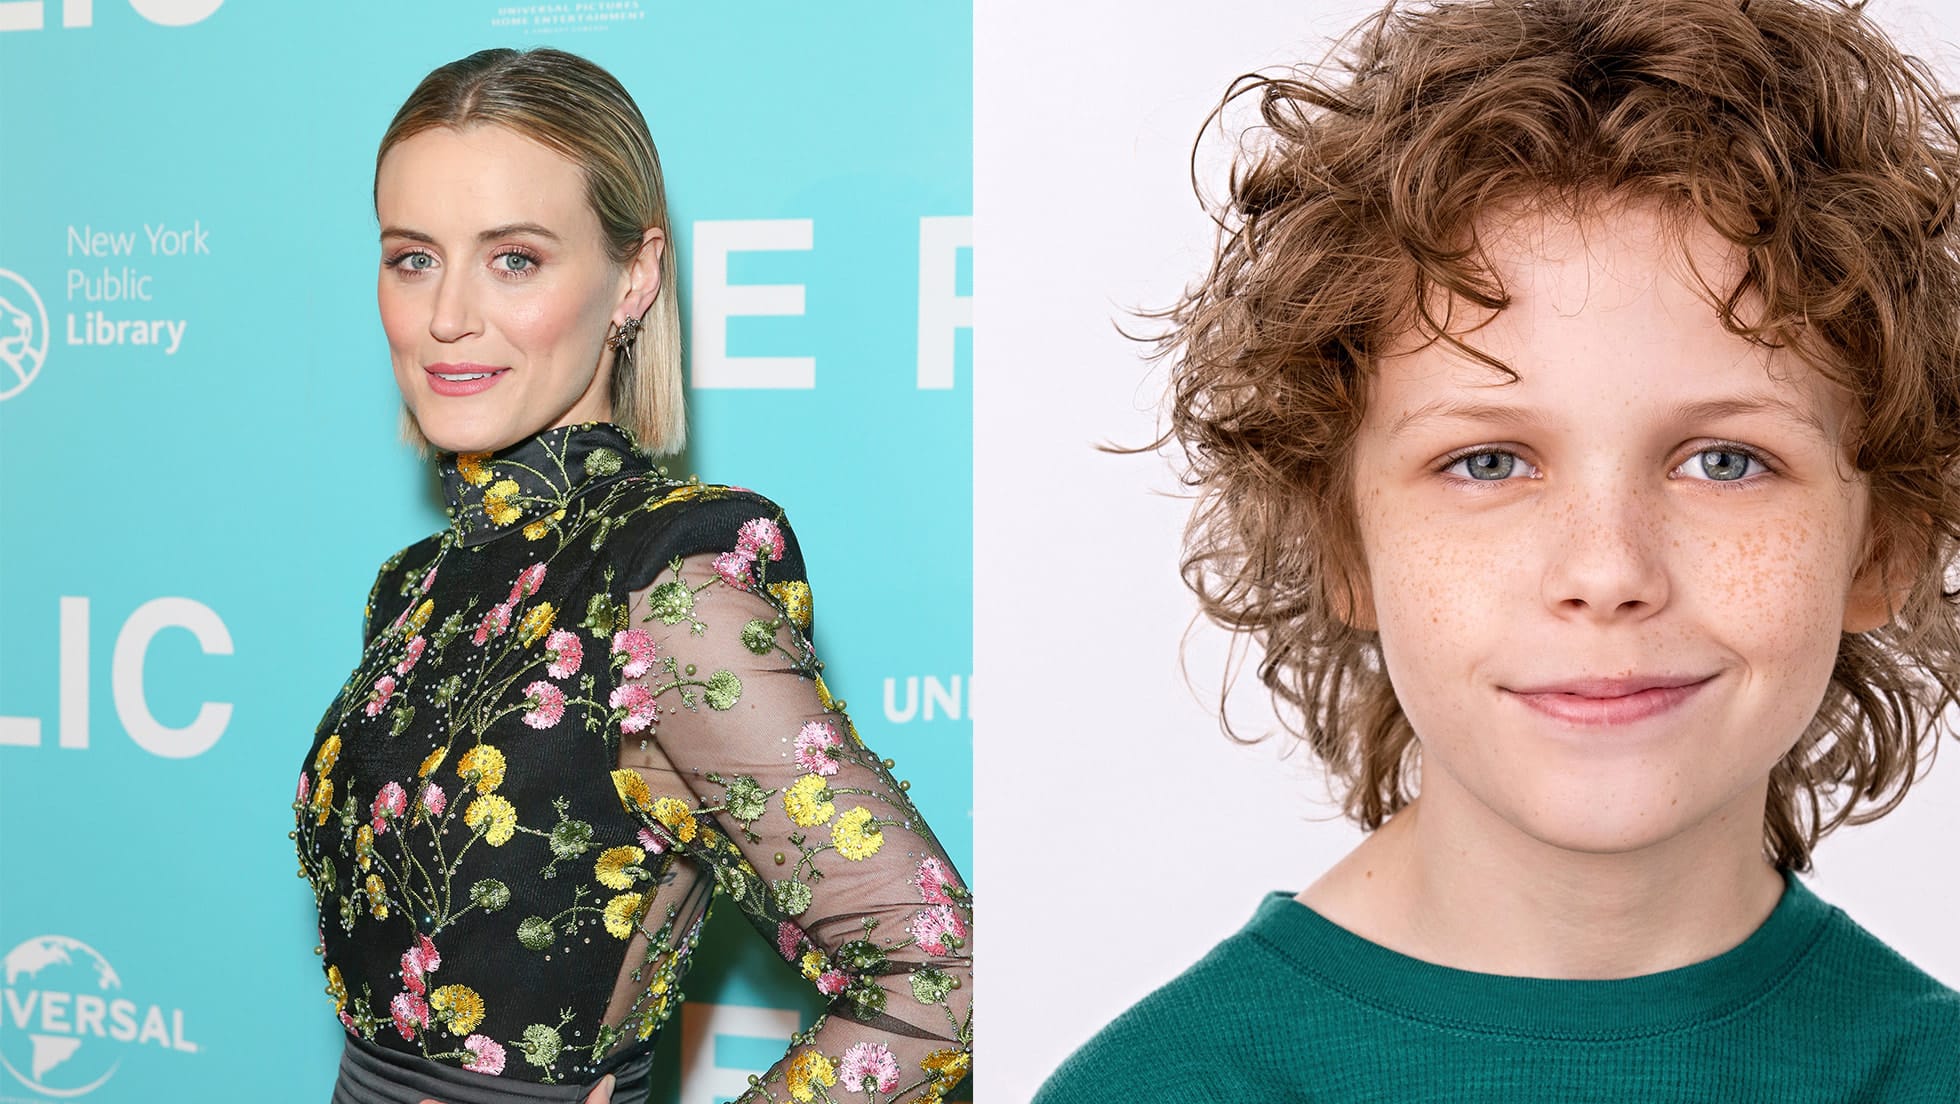 An image showing actress Taylor Schilling, at left, and actor Colin O’Brien, at right, who star in an Apple TV+ drama series based on Ann Napolitano's bestelling novel titled Dear Edward